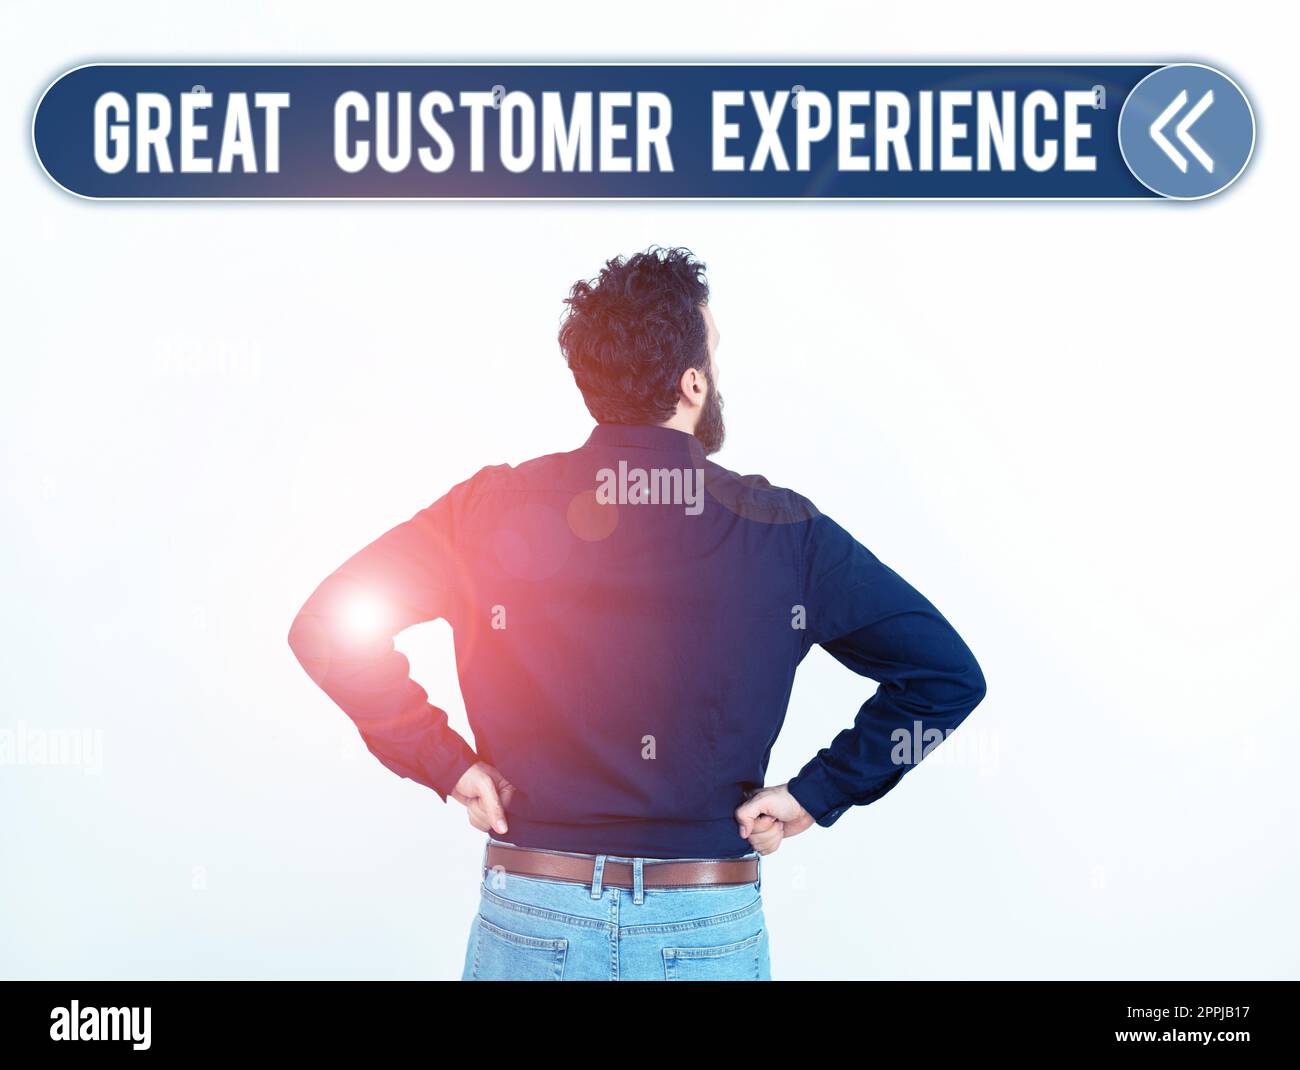 Conceptual caption Great Customer Experience. Concept meaning responding to clients with friendly helpful way Stock Photo